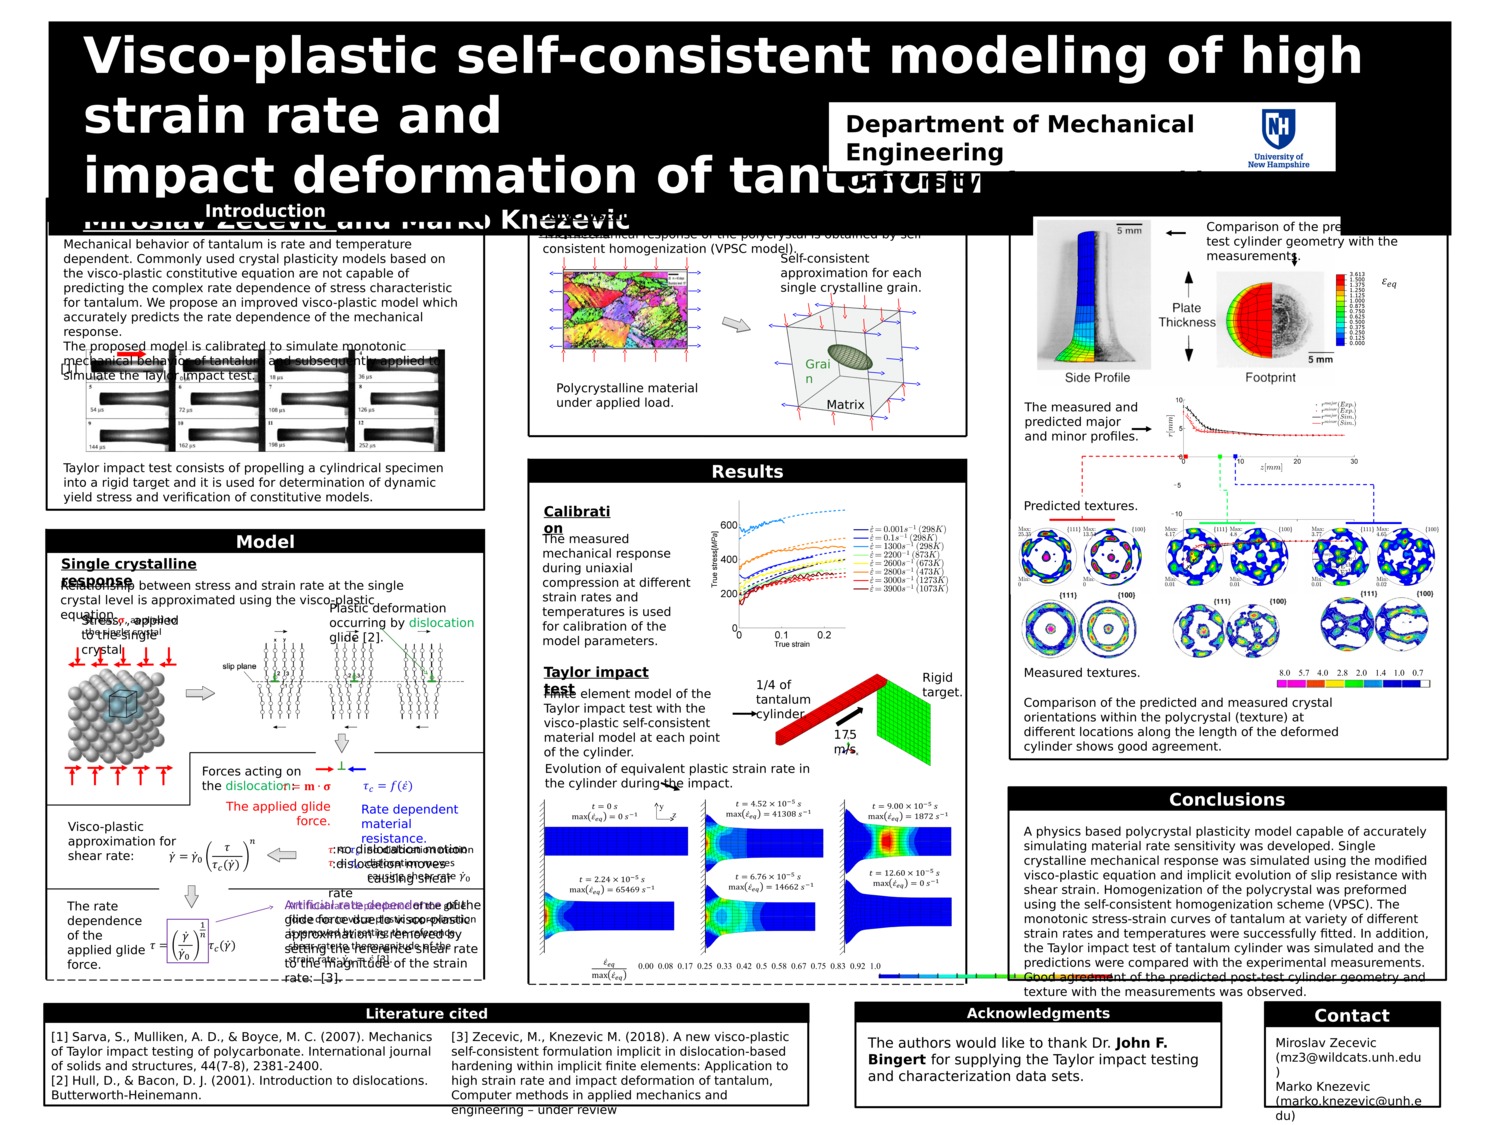 Visco-Plastic Self-Consistent Modeling Of High Strain Rate And Impact Deformation Of Tantalum by mz3